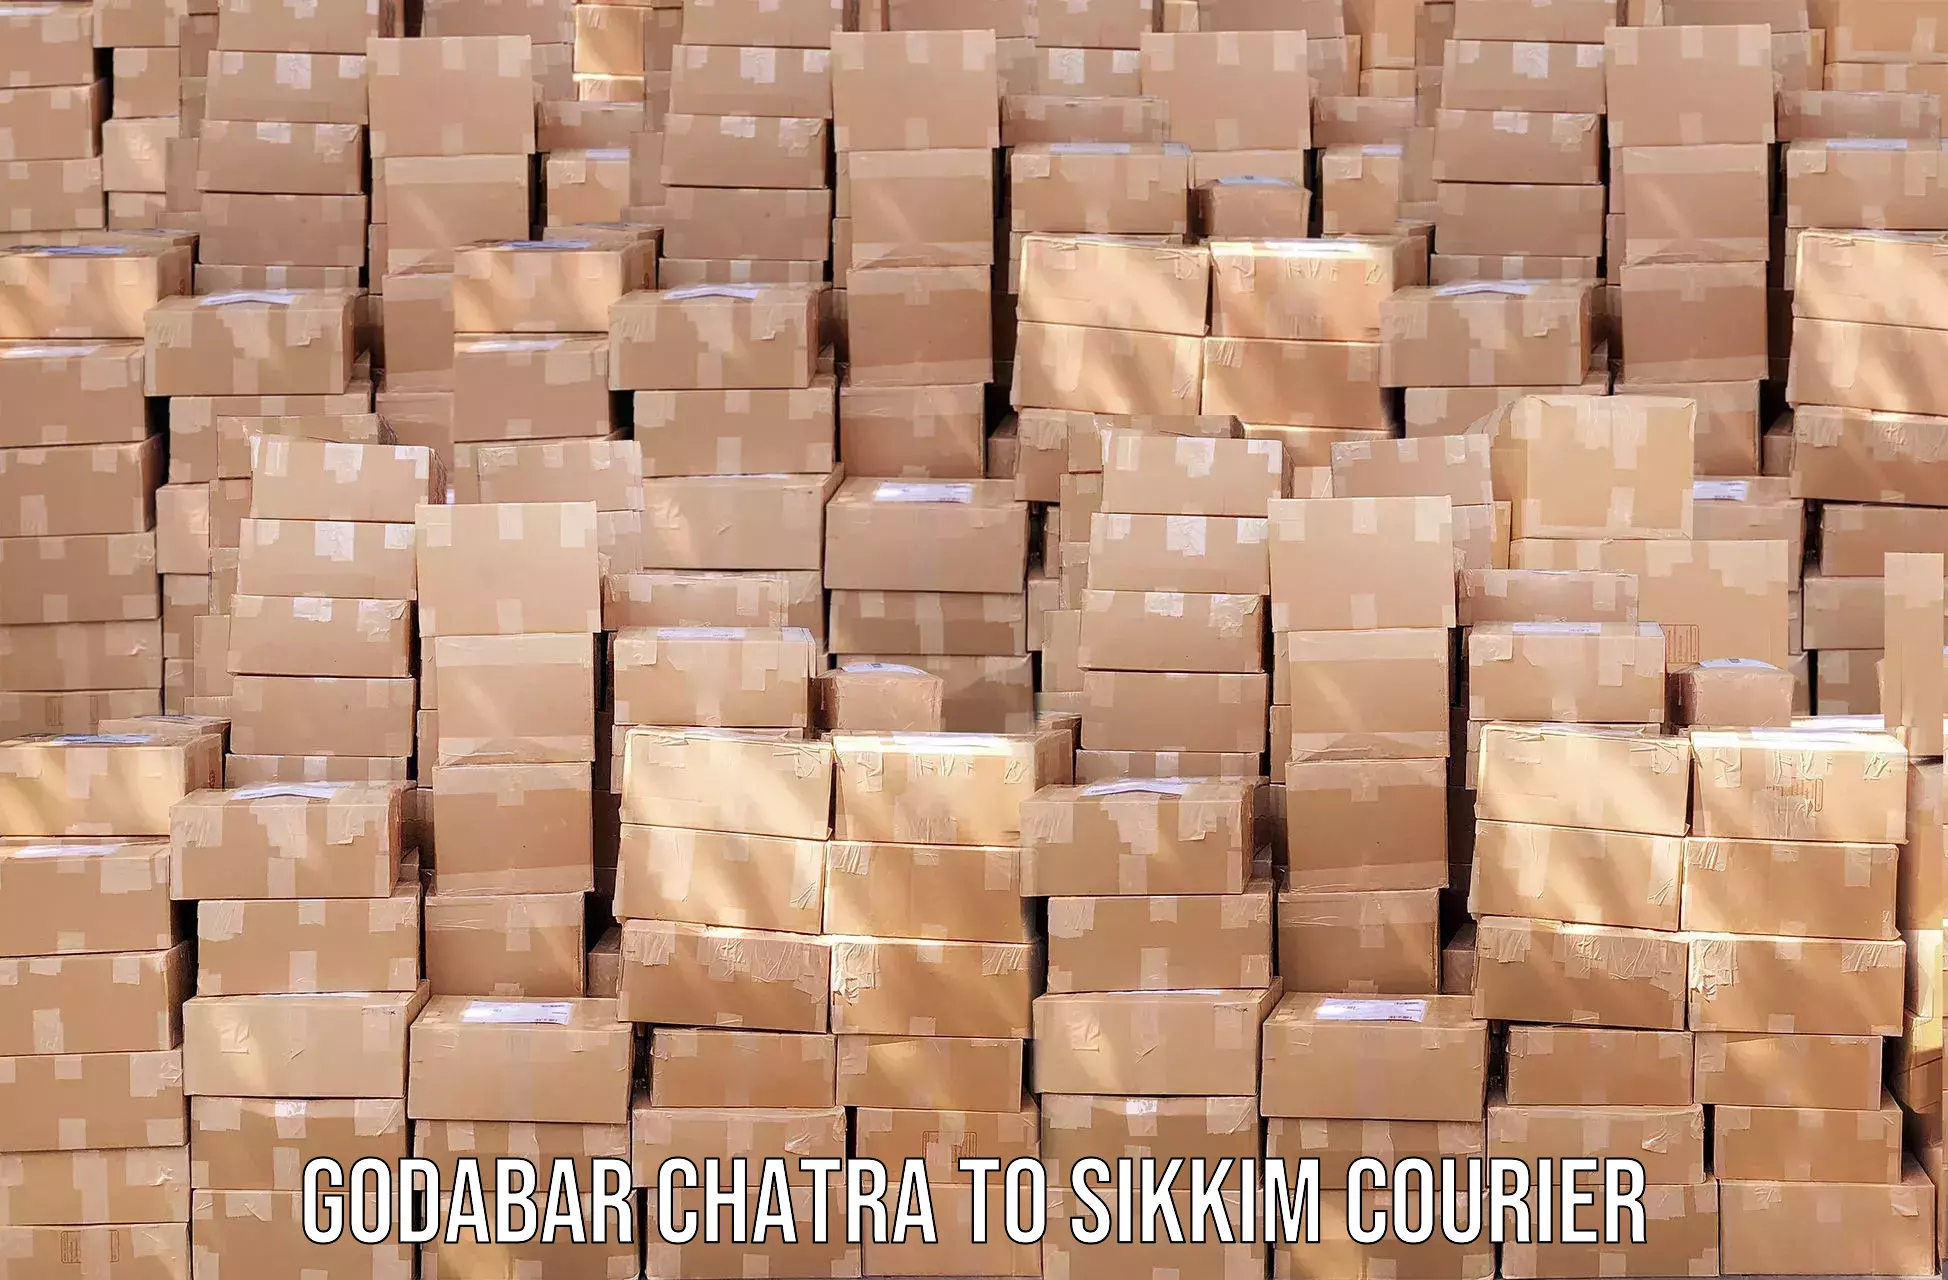 Doorstep delivery service Godabar Chatra to South Sikkim